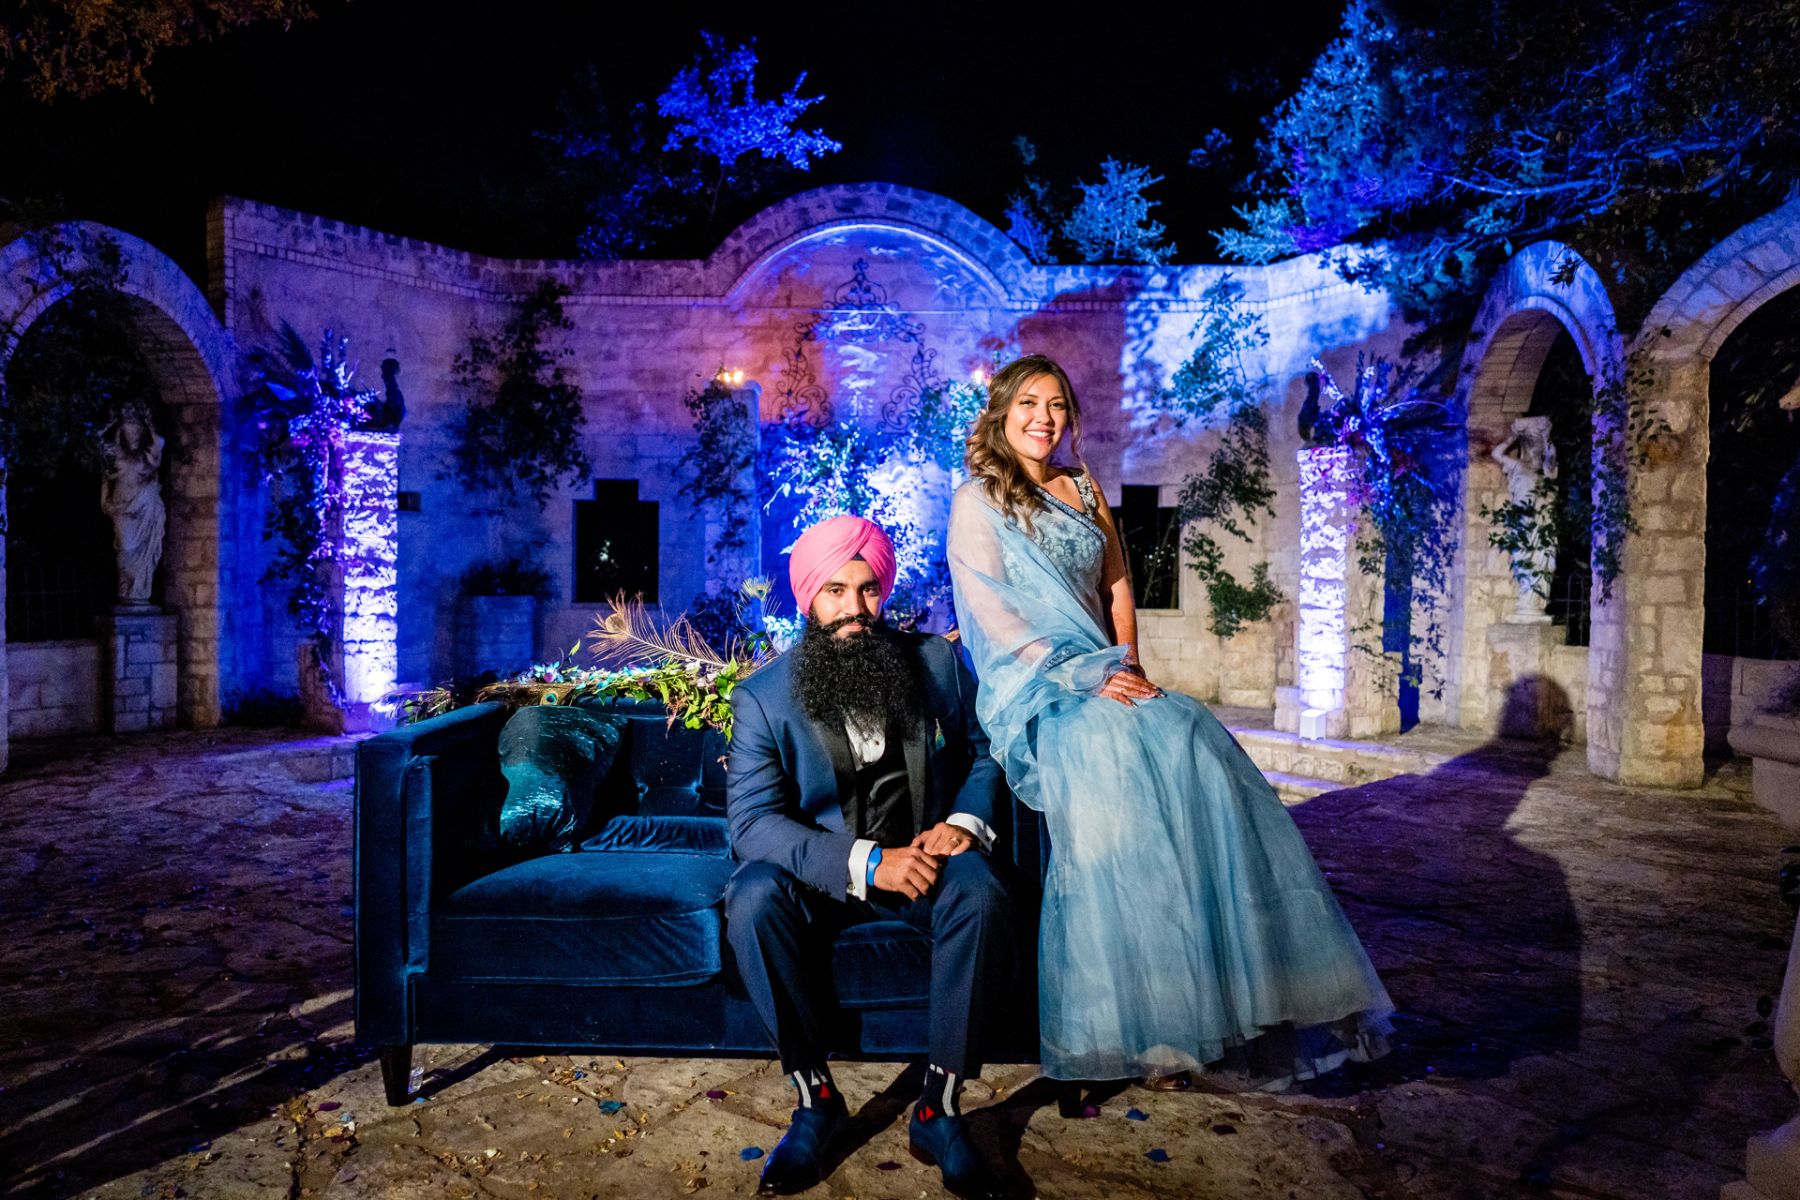 Bride and groom wearing cultural wedding garments sit on a blue velvet couch in the courtyard of The Vistas on Seward Hill with the LED lights illuminating the stone walls in the background.